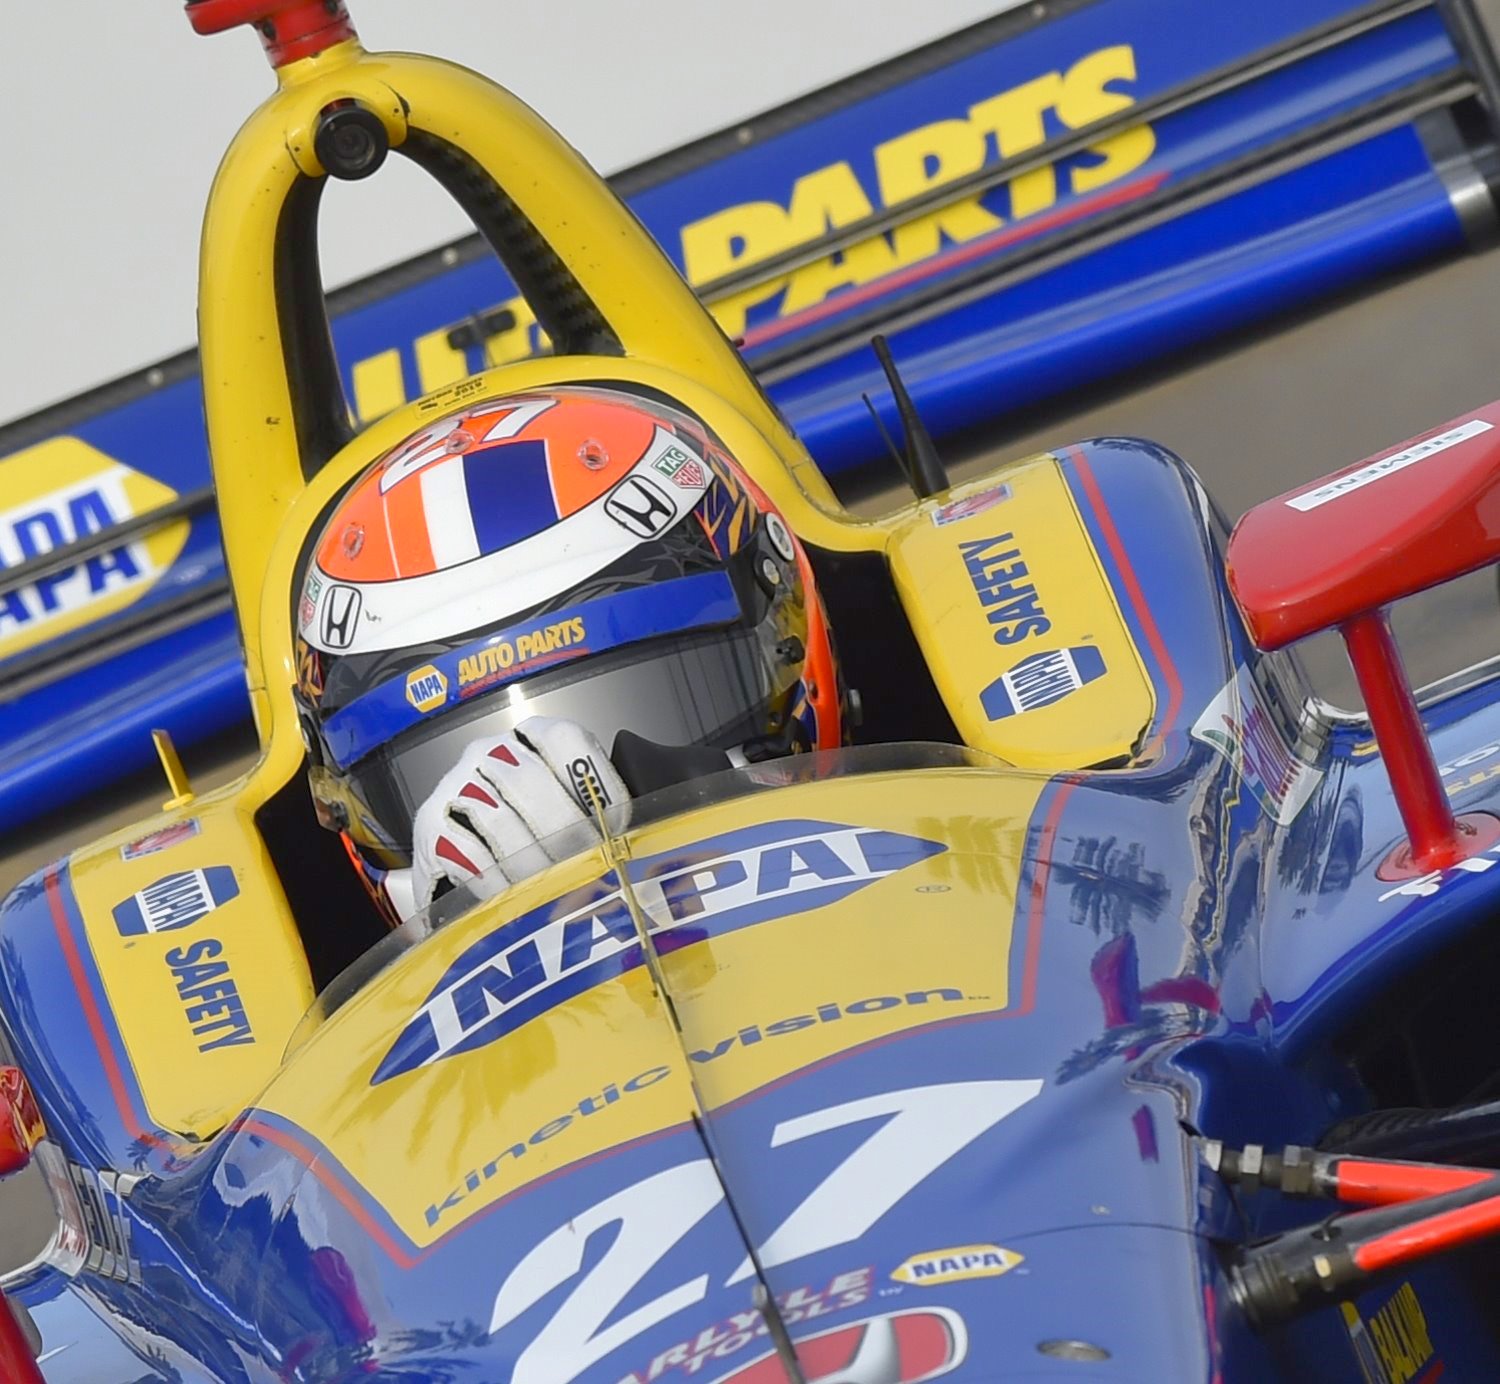 Rossi was one of several drivers screwed by IndyCar's lunatic closed pit rule during cautions